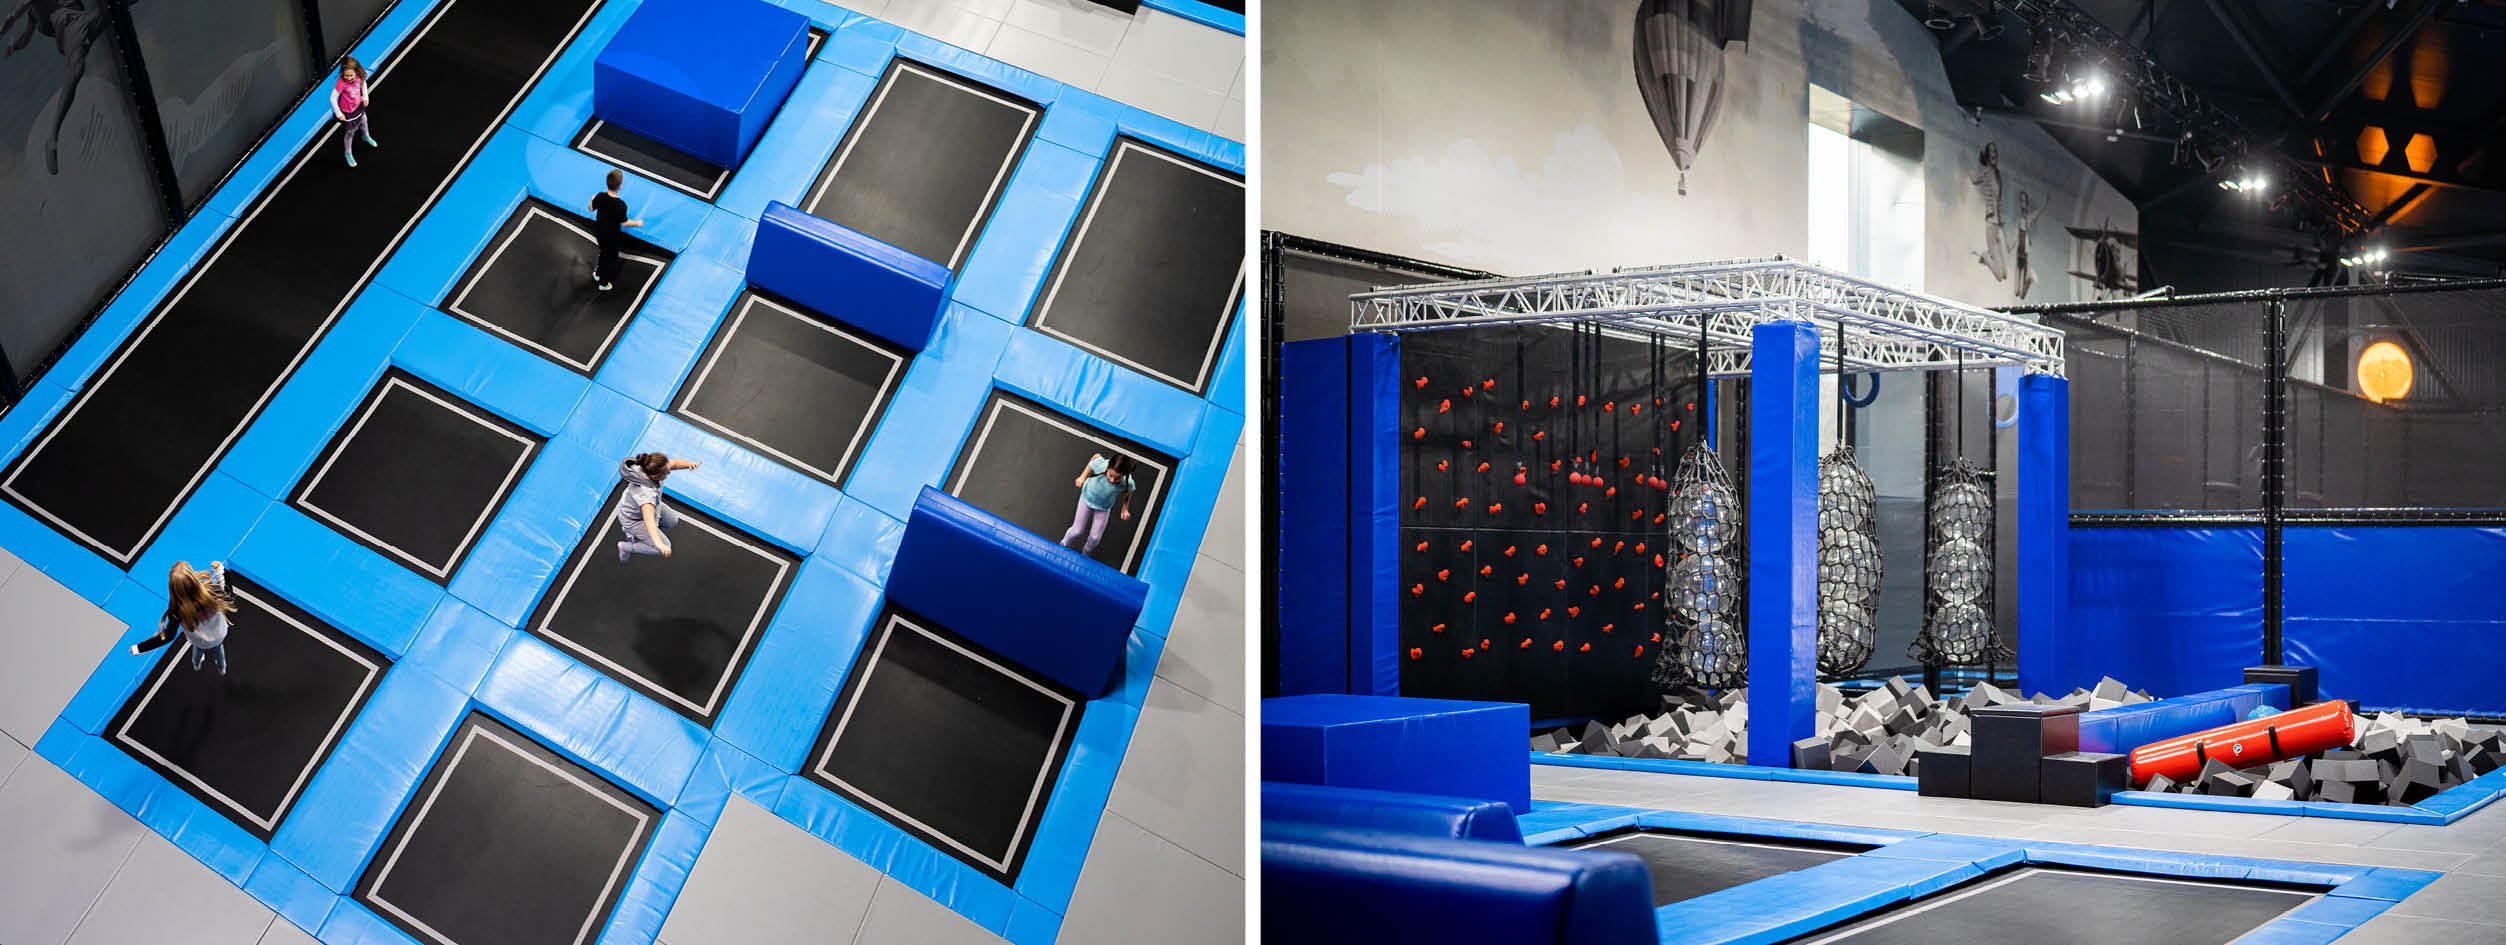 Trampoline park Jumping Dome